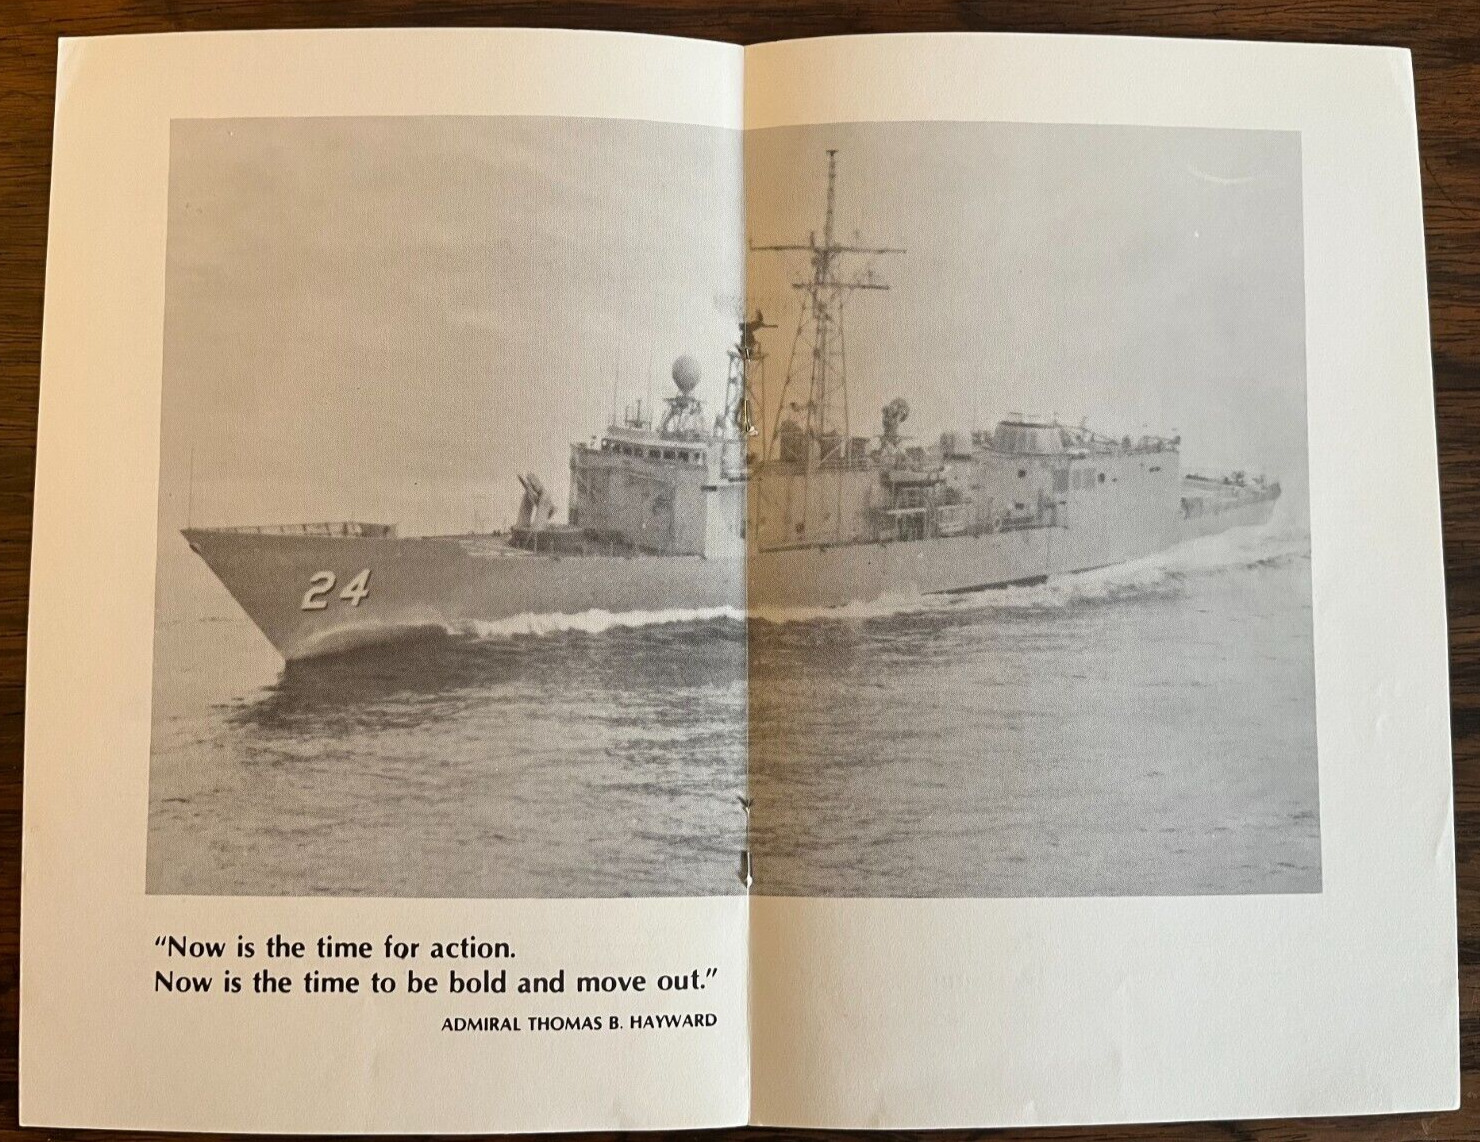 USS JACK WILLIAMS GUIDED MISSILE FRIGATE NAVY BAHRAIN ARABIC TEXT PERSIAN GULF